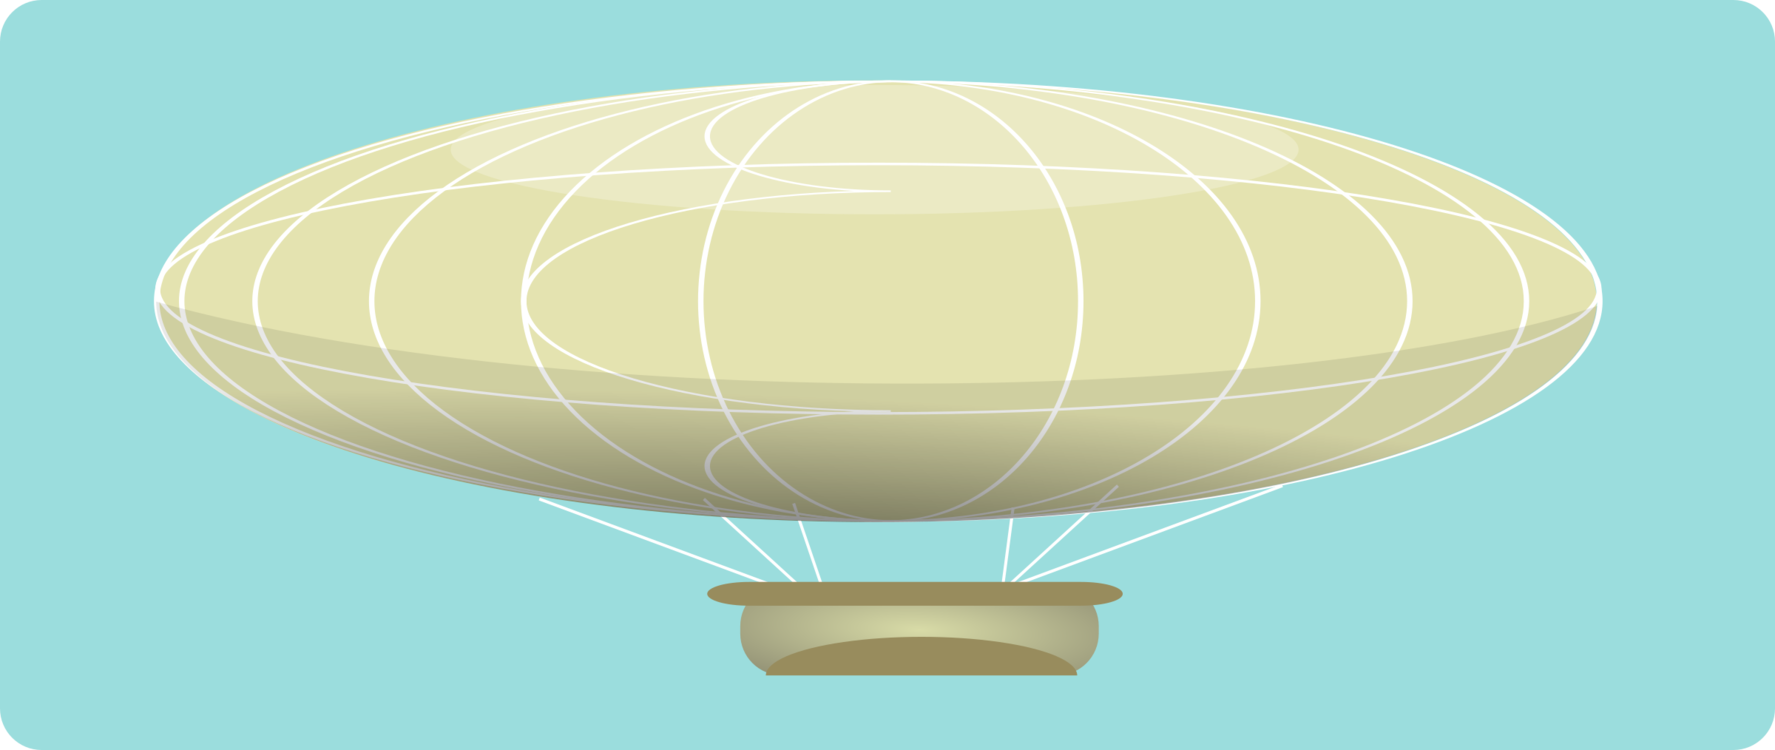 Sphere,Sky,Hot Air Balloon PNG Clipart.